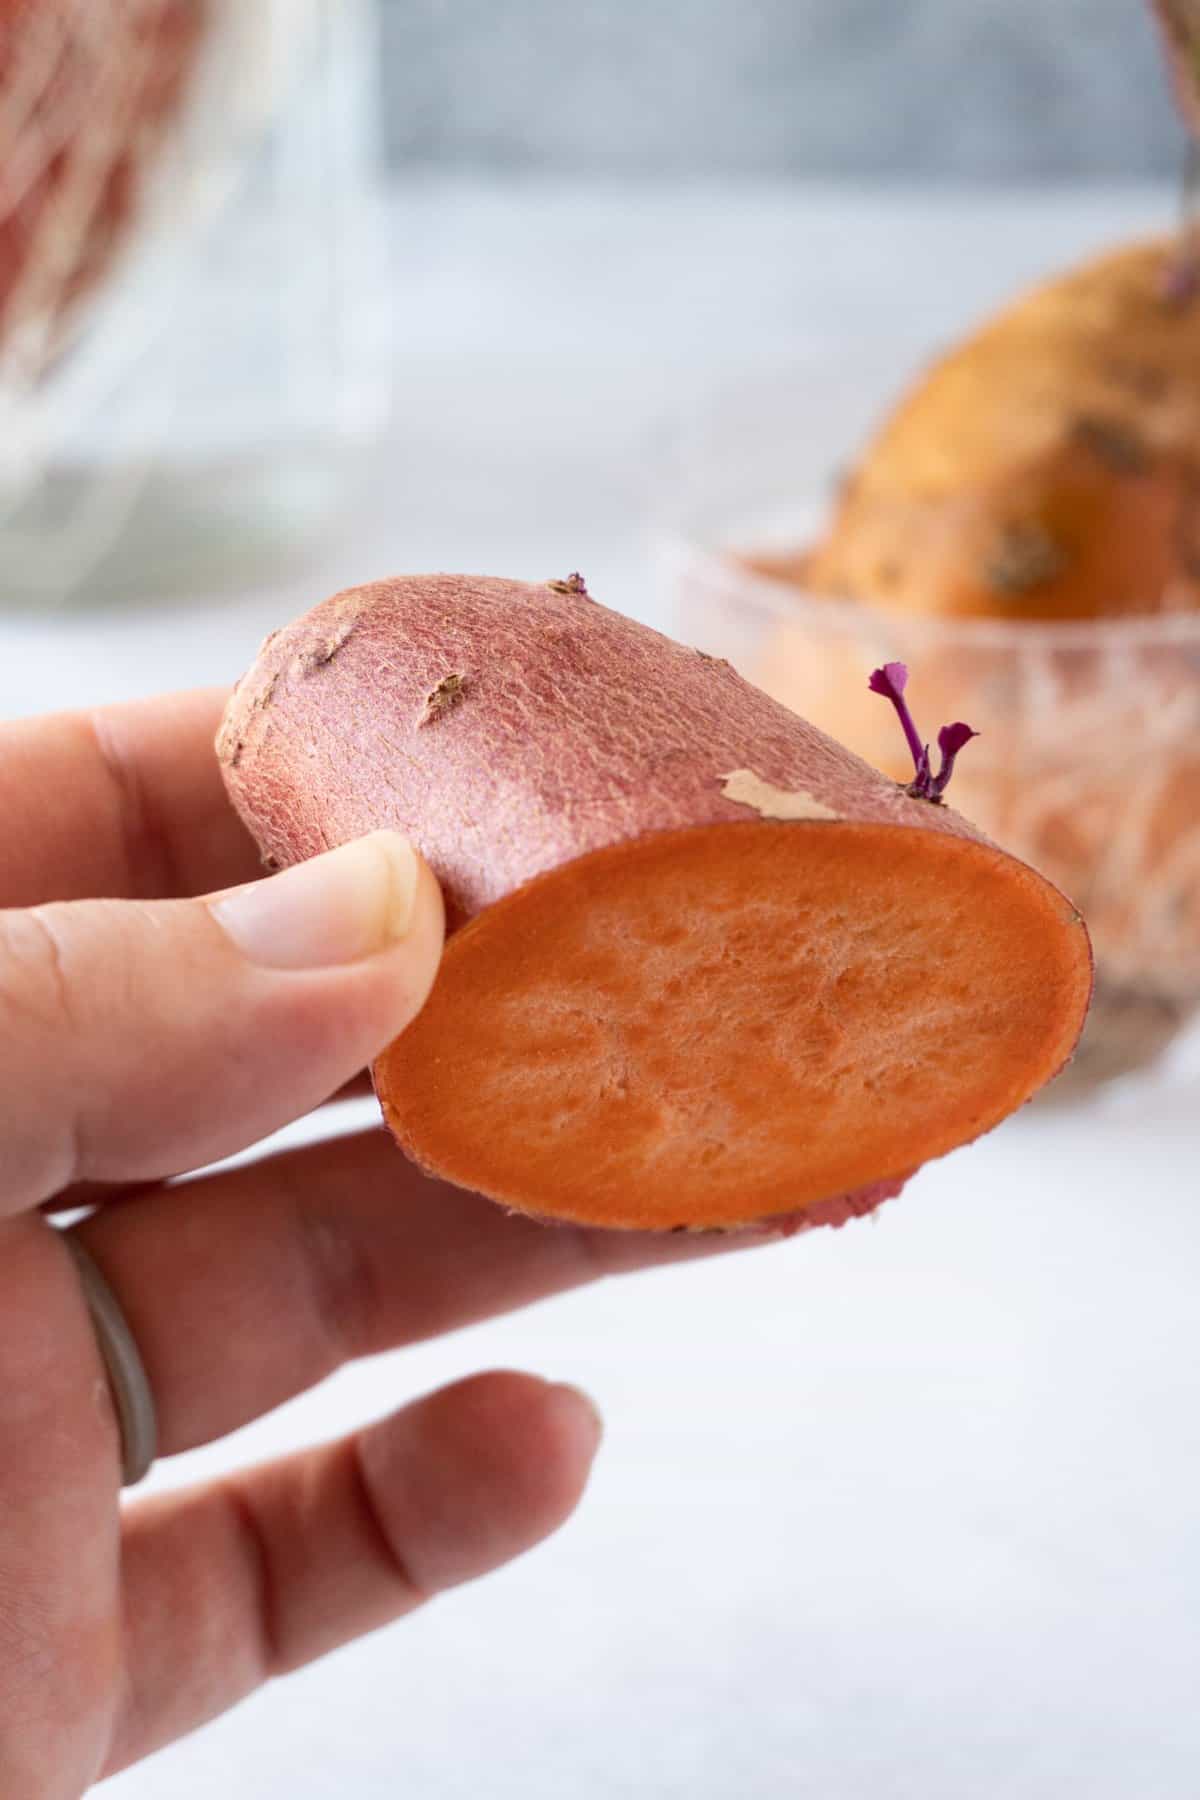 mold part of sweet potato removed